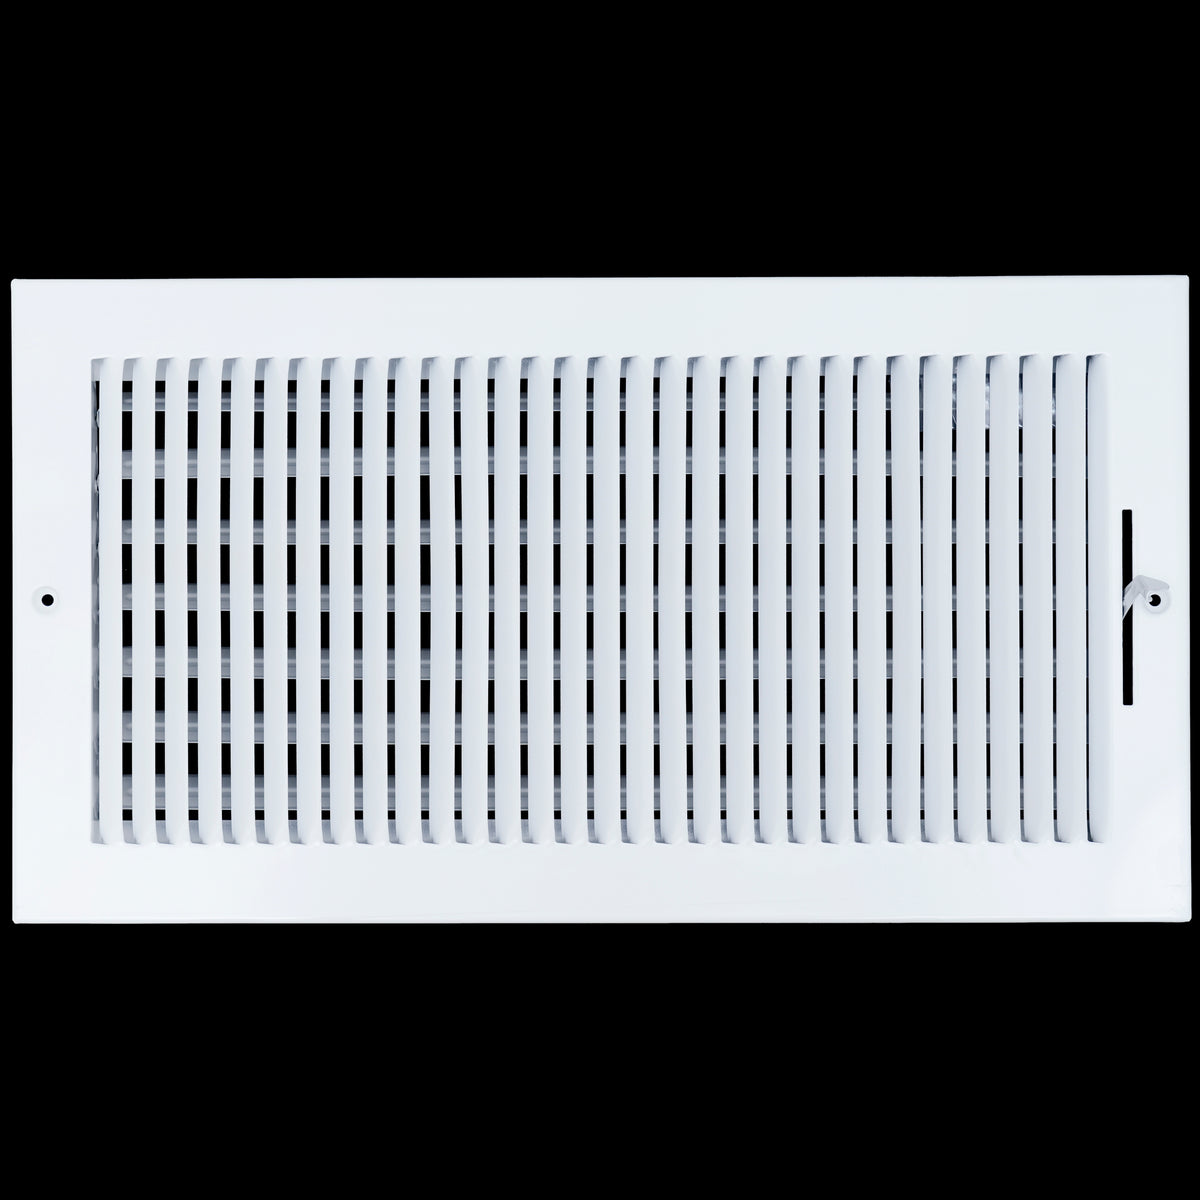 airgrilles 16 x 8 duct opening  -  1 way steel air supply diffuser for sidewall and ceiling hnd-asg-wh-1way-16x8 764613097719 - 1